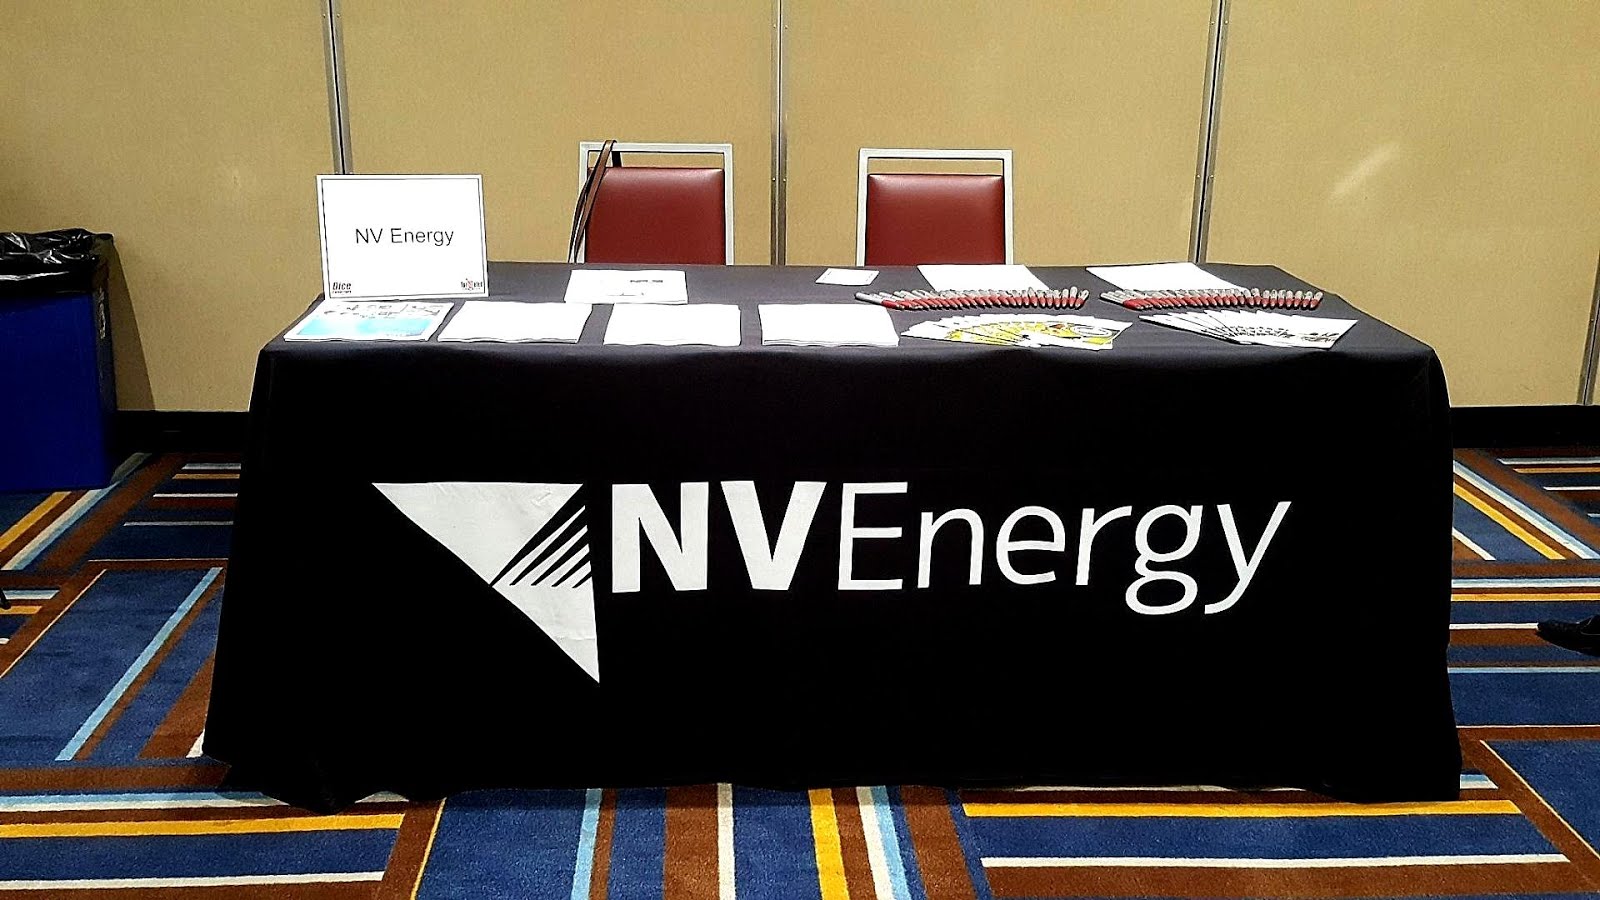 Nv Energy Customer Service Phone Number - Energy Choices